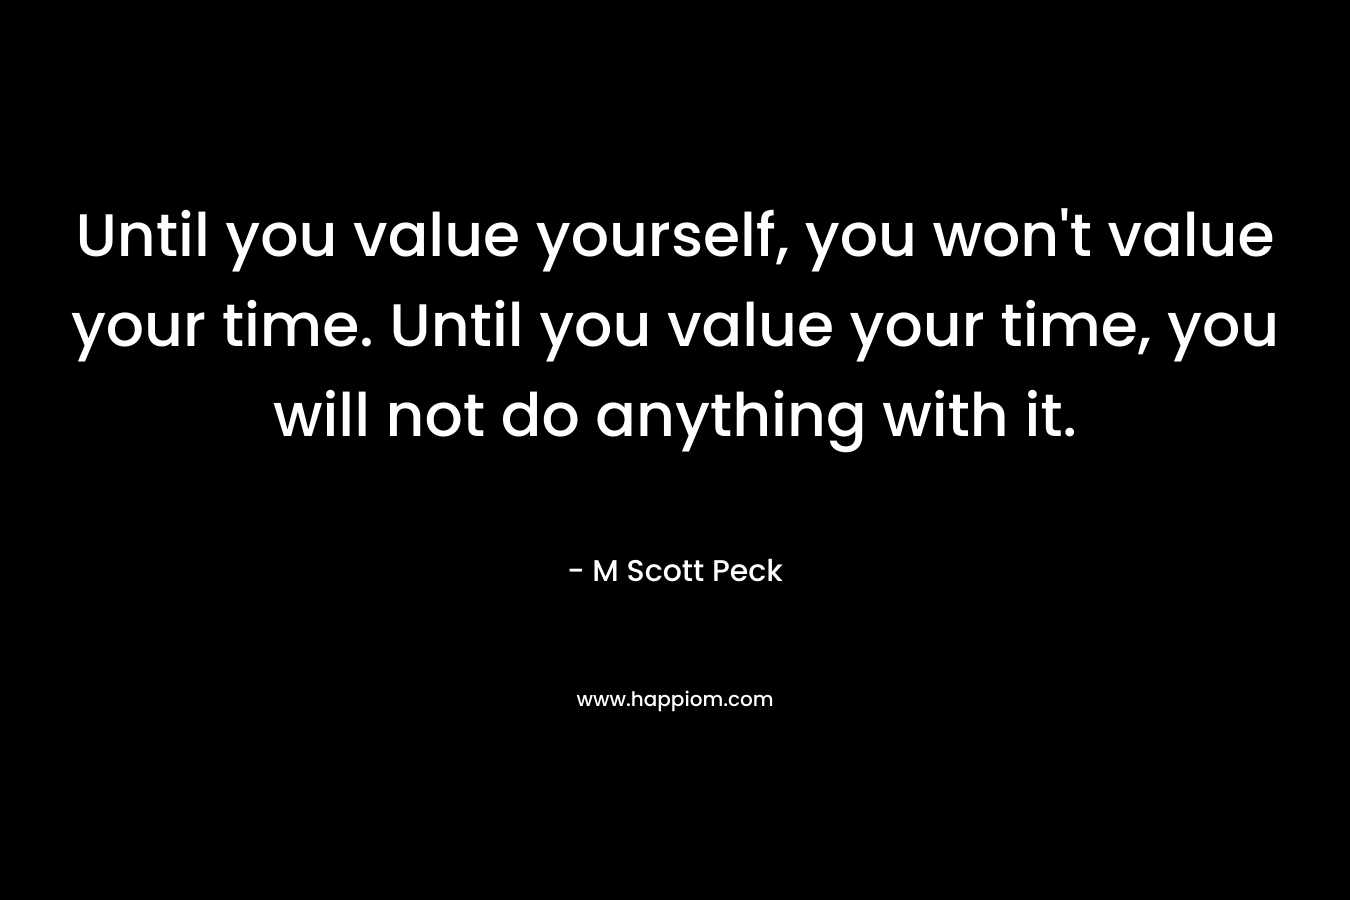 Until you value yourself, you won't value your time. Until you value your time, you will not do anything with it.